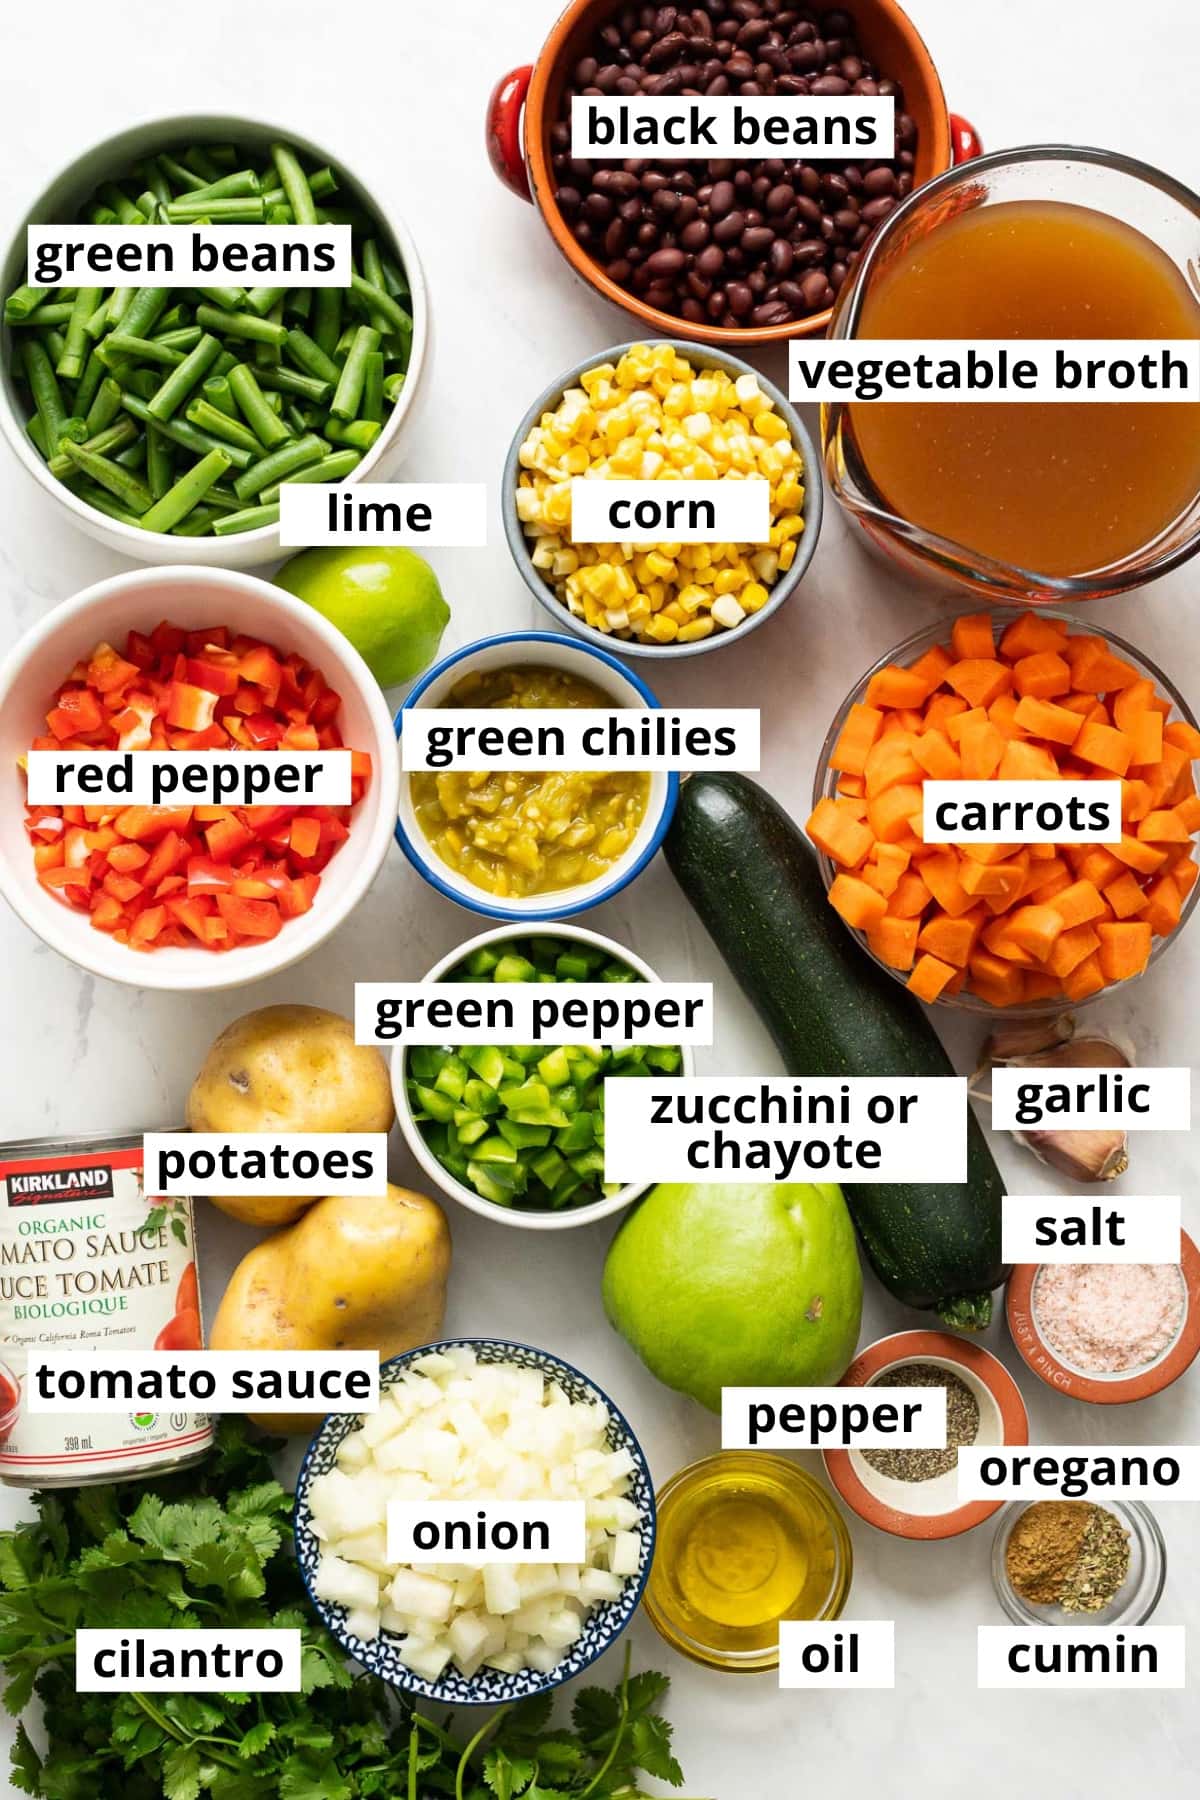 Green beans, black beans, broth, corn, lime, bell peppers, green chilies, carrots, zucchini, potatoes, tomato sauce, onion, cilantro, oil, garlic and spices.